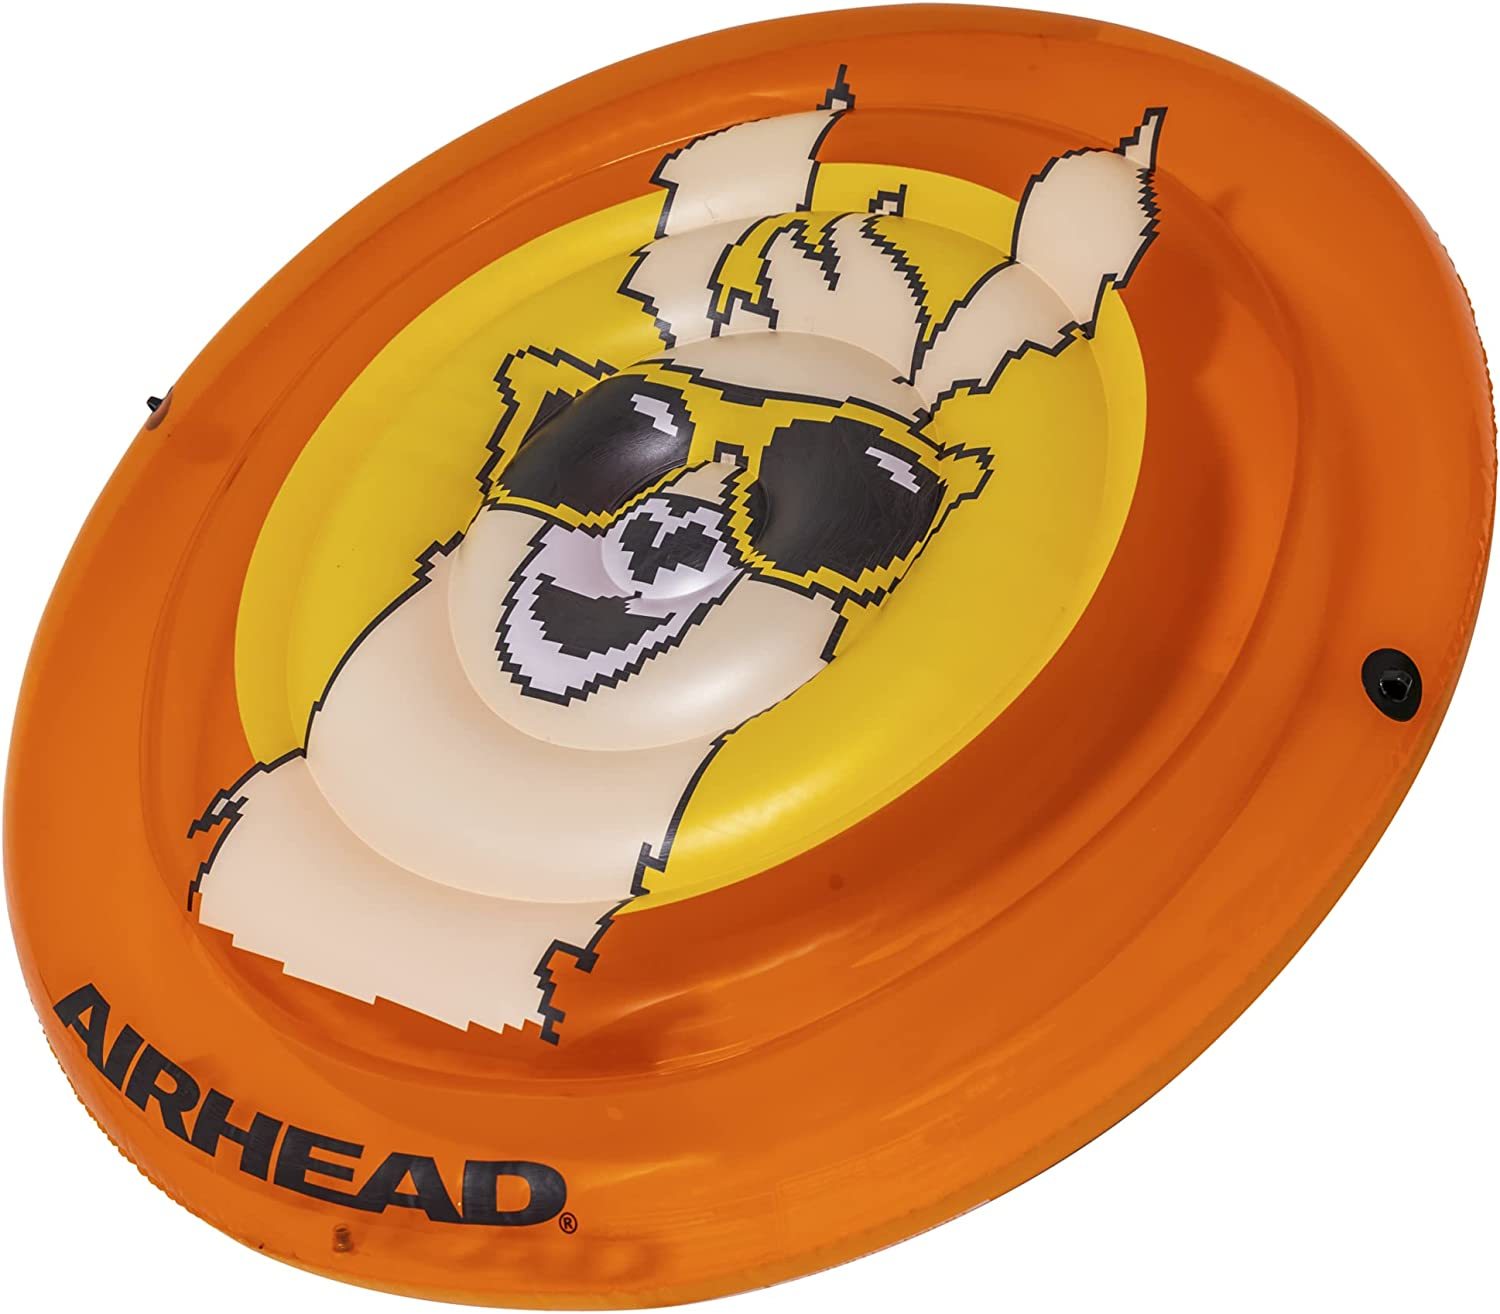 Multiple Styles Are Available For The Airhead Pixelated Inflatable Pool Float. - $35.94